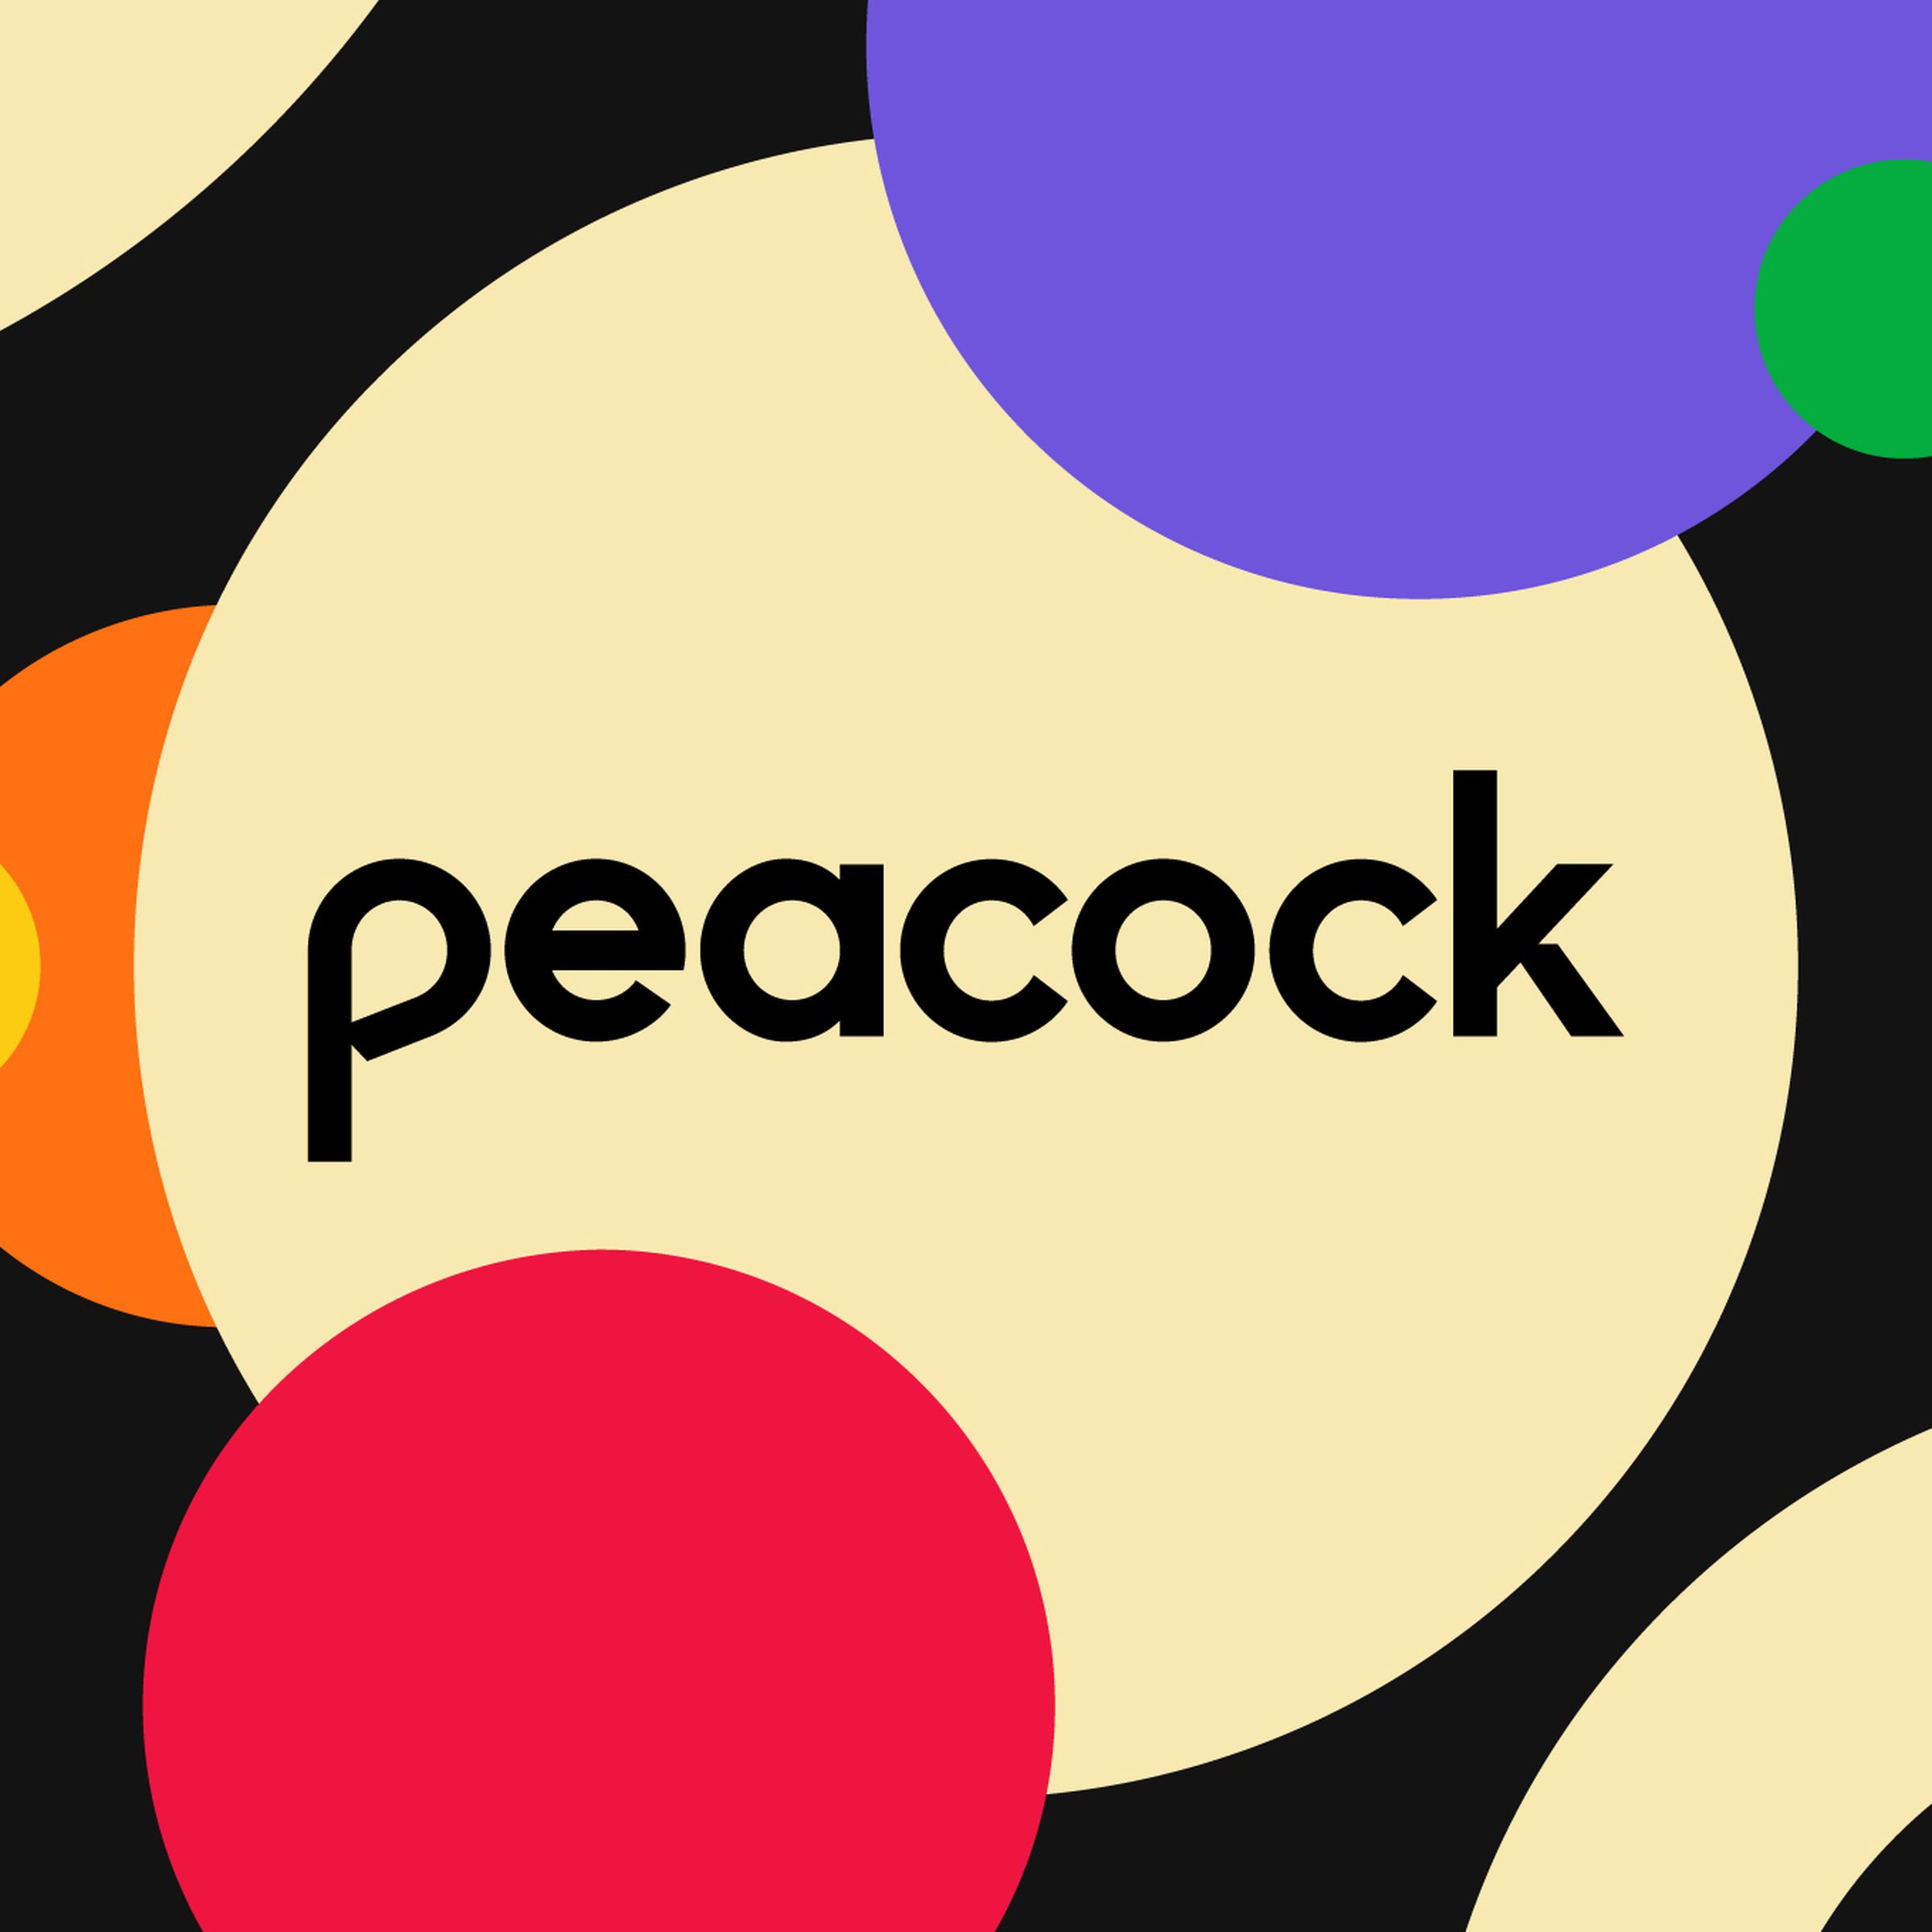 A graphic showing Peacock’s logo in a beige circle surrounded by other colorful circles